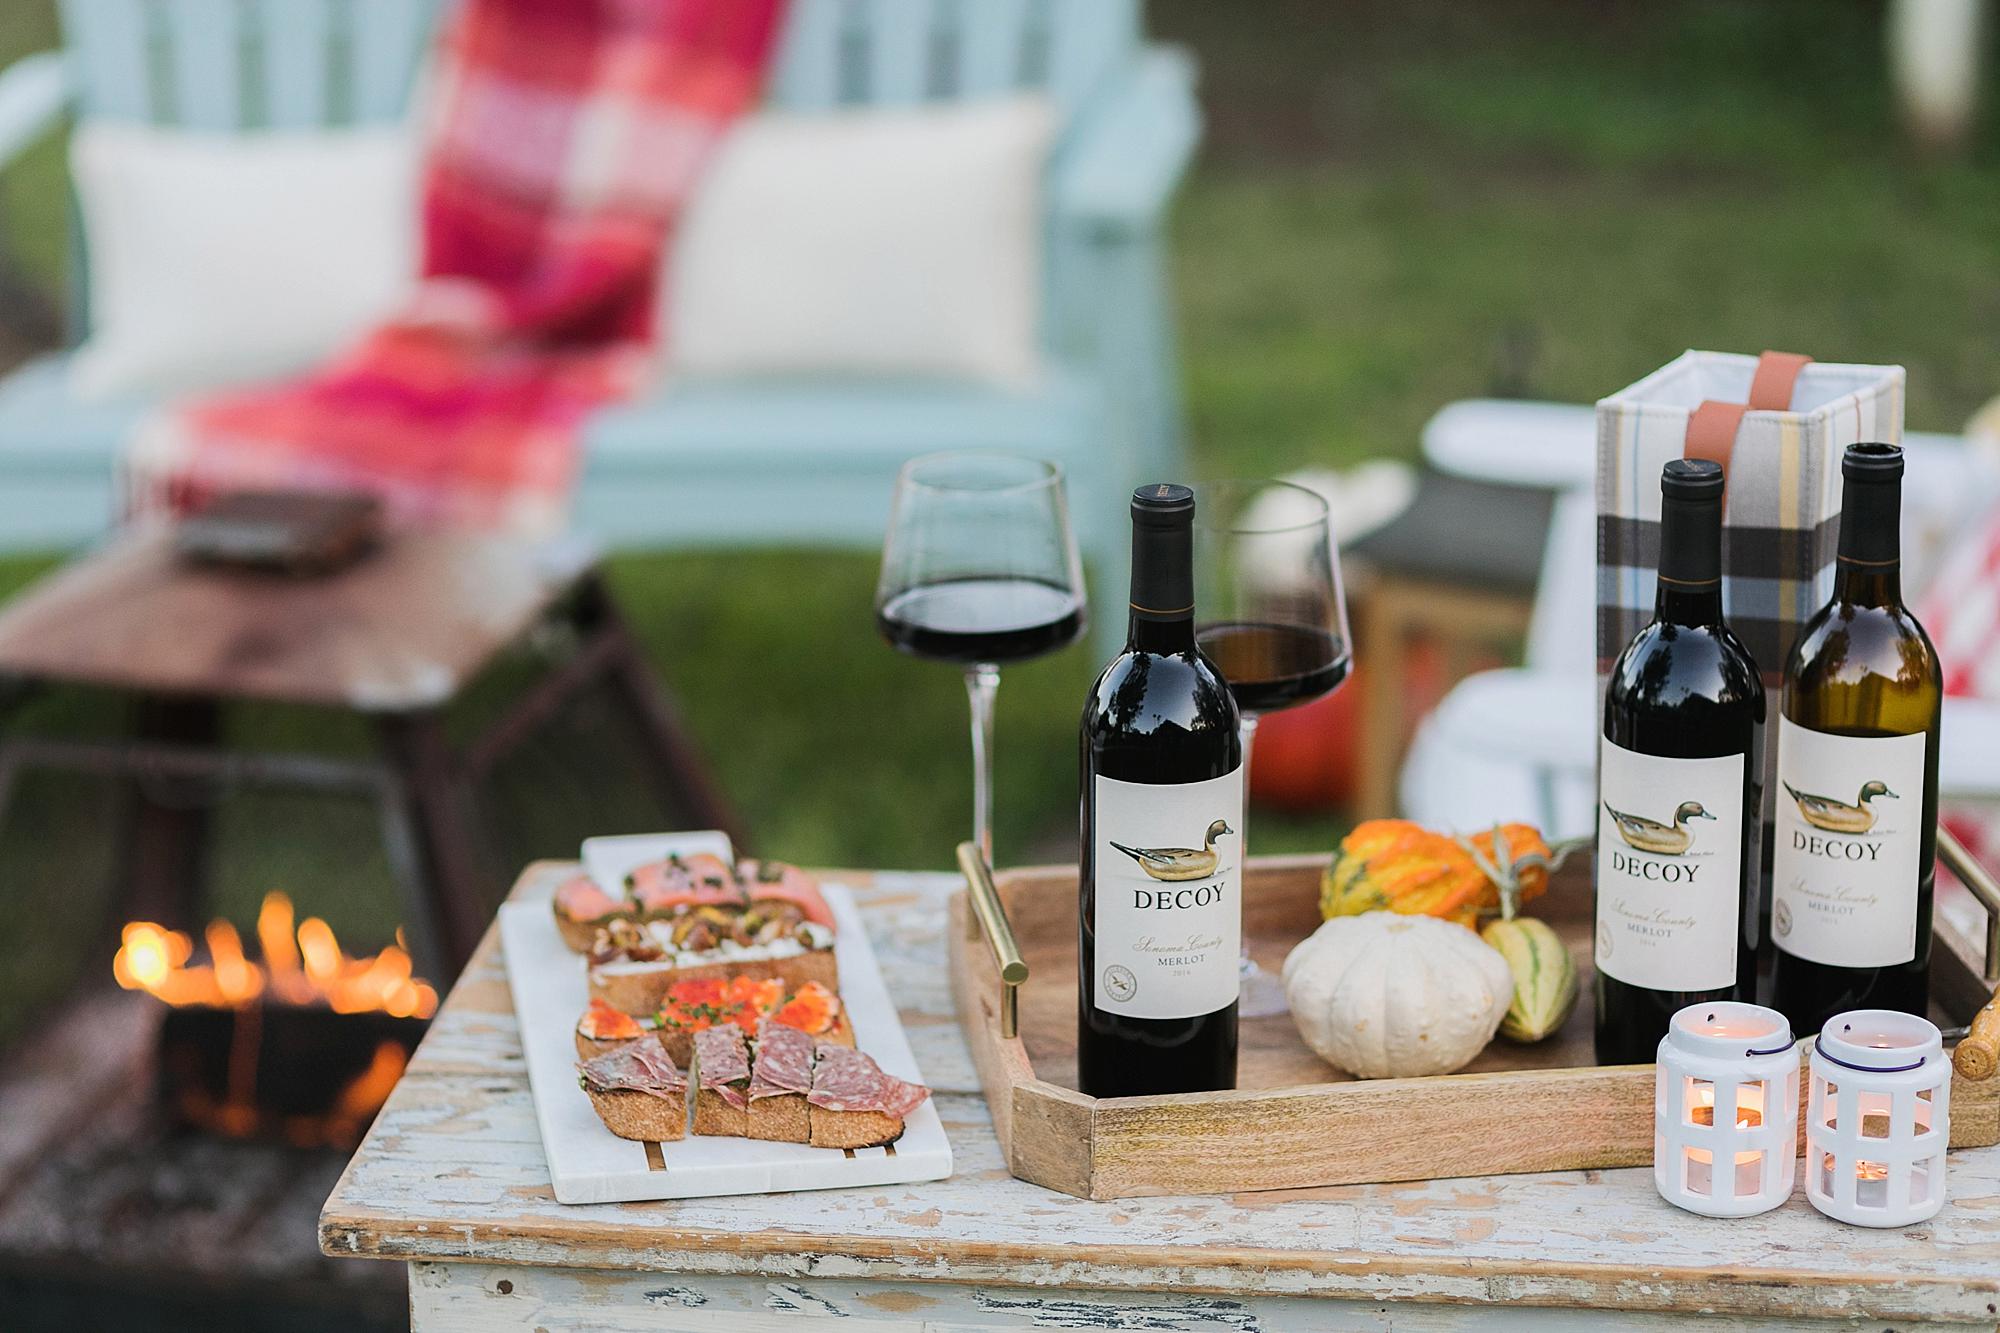 merlot decoy wine for merlot month in October. fire pit for fall gathering outdoors and bruschetta board for wine